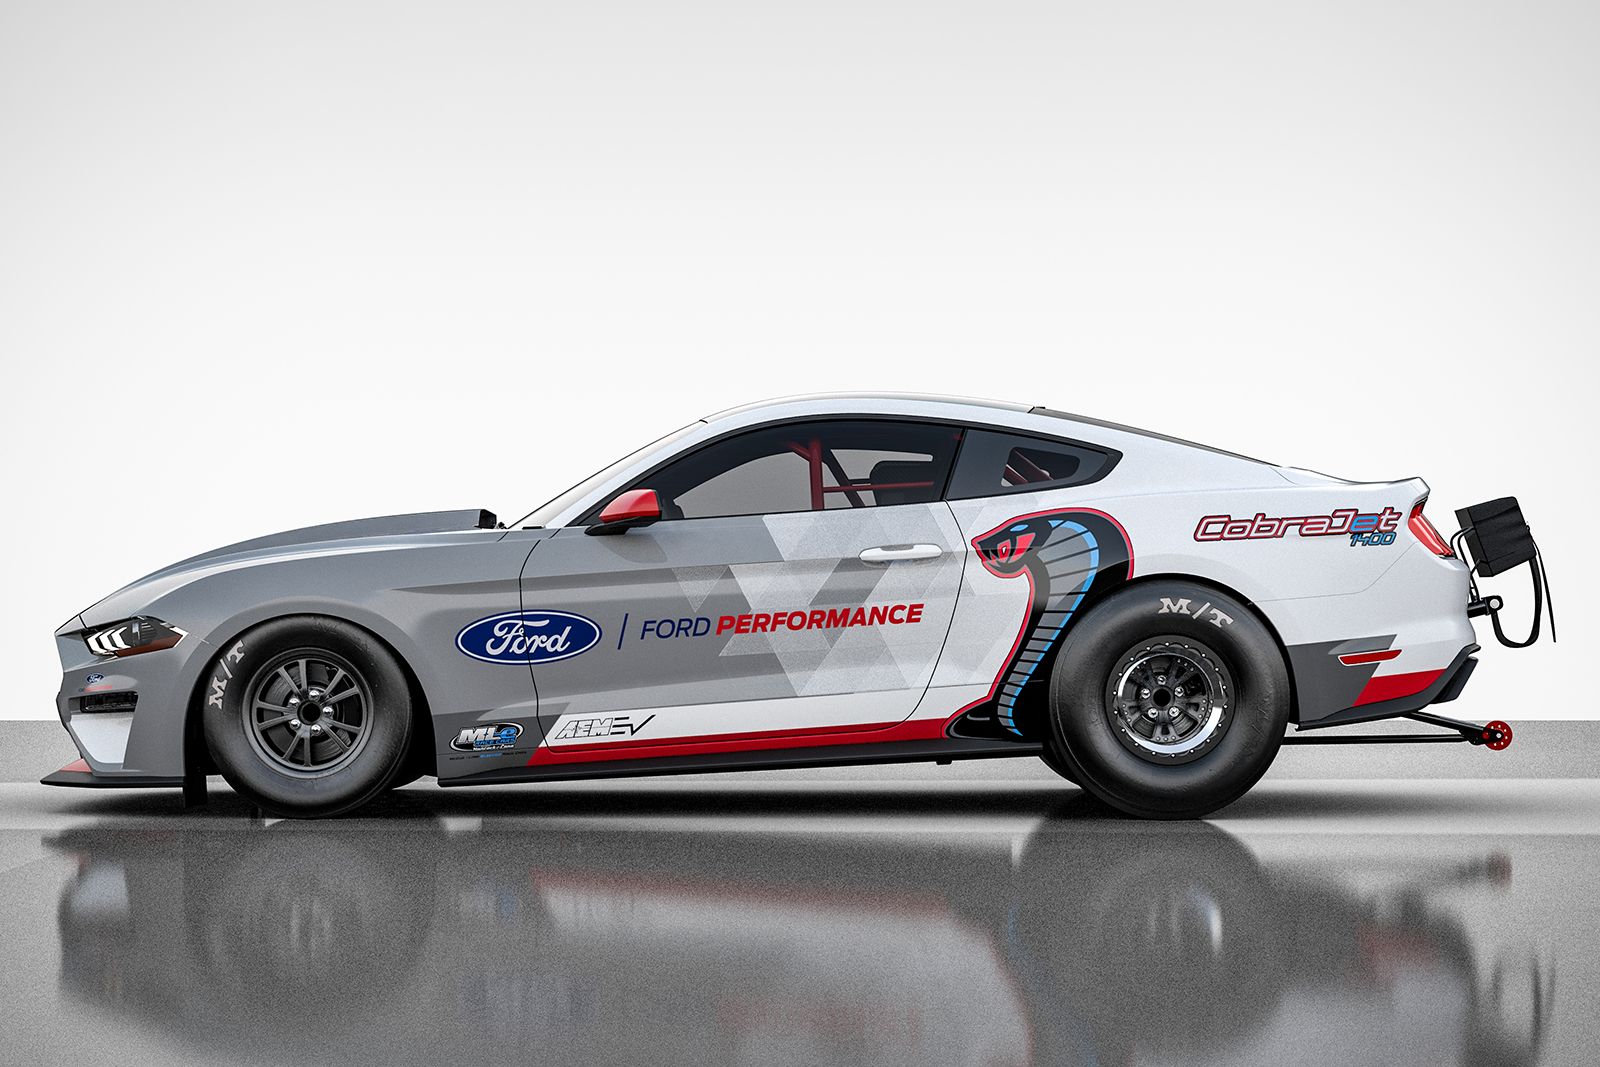 All-electric Ford Mustang Cobra Jet 1400 built to crush dragster races silently image 1